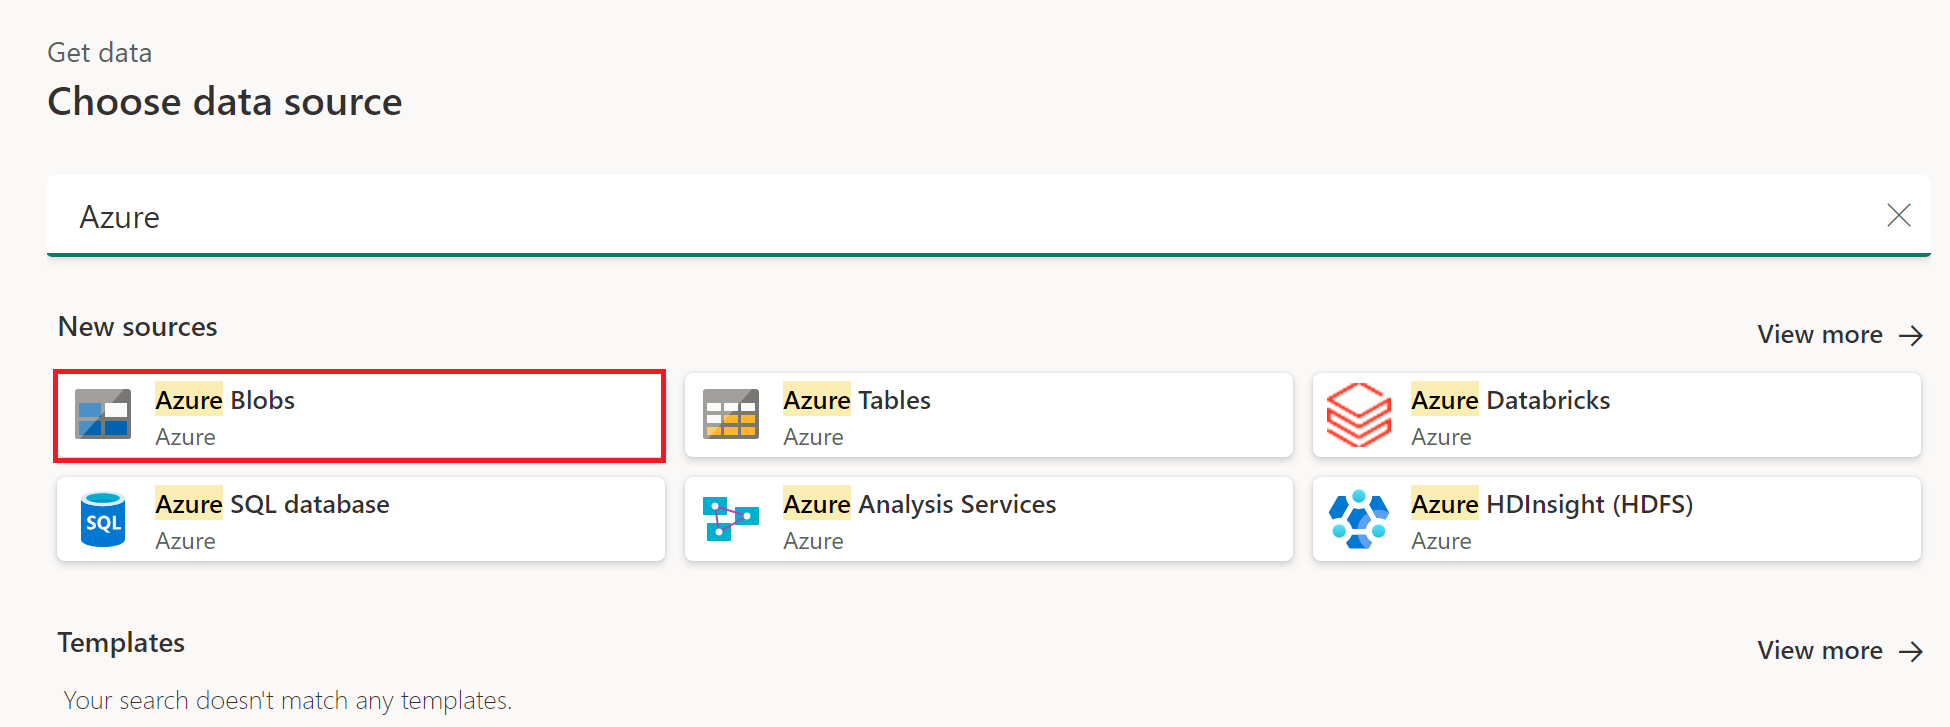 Screenshot of the Choose data source page, with the Azure category selected, and Azure Blobs emphasized.